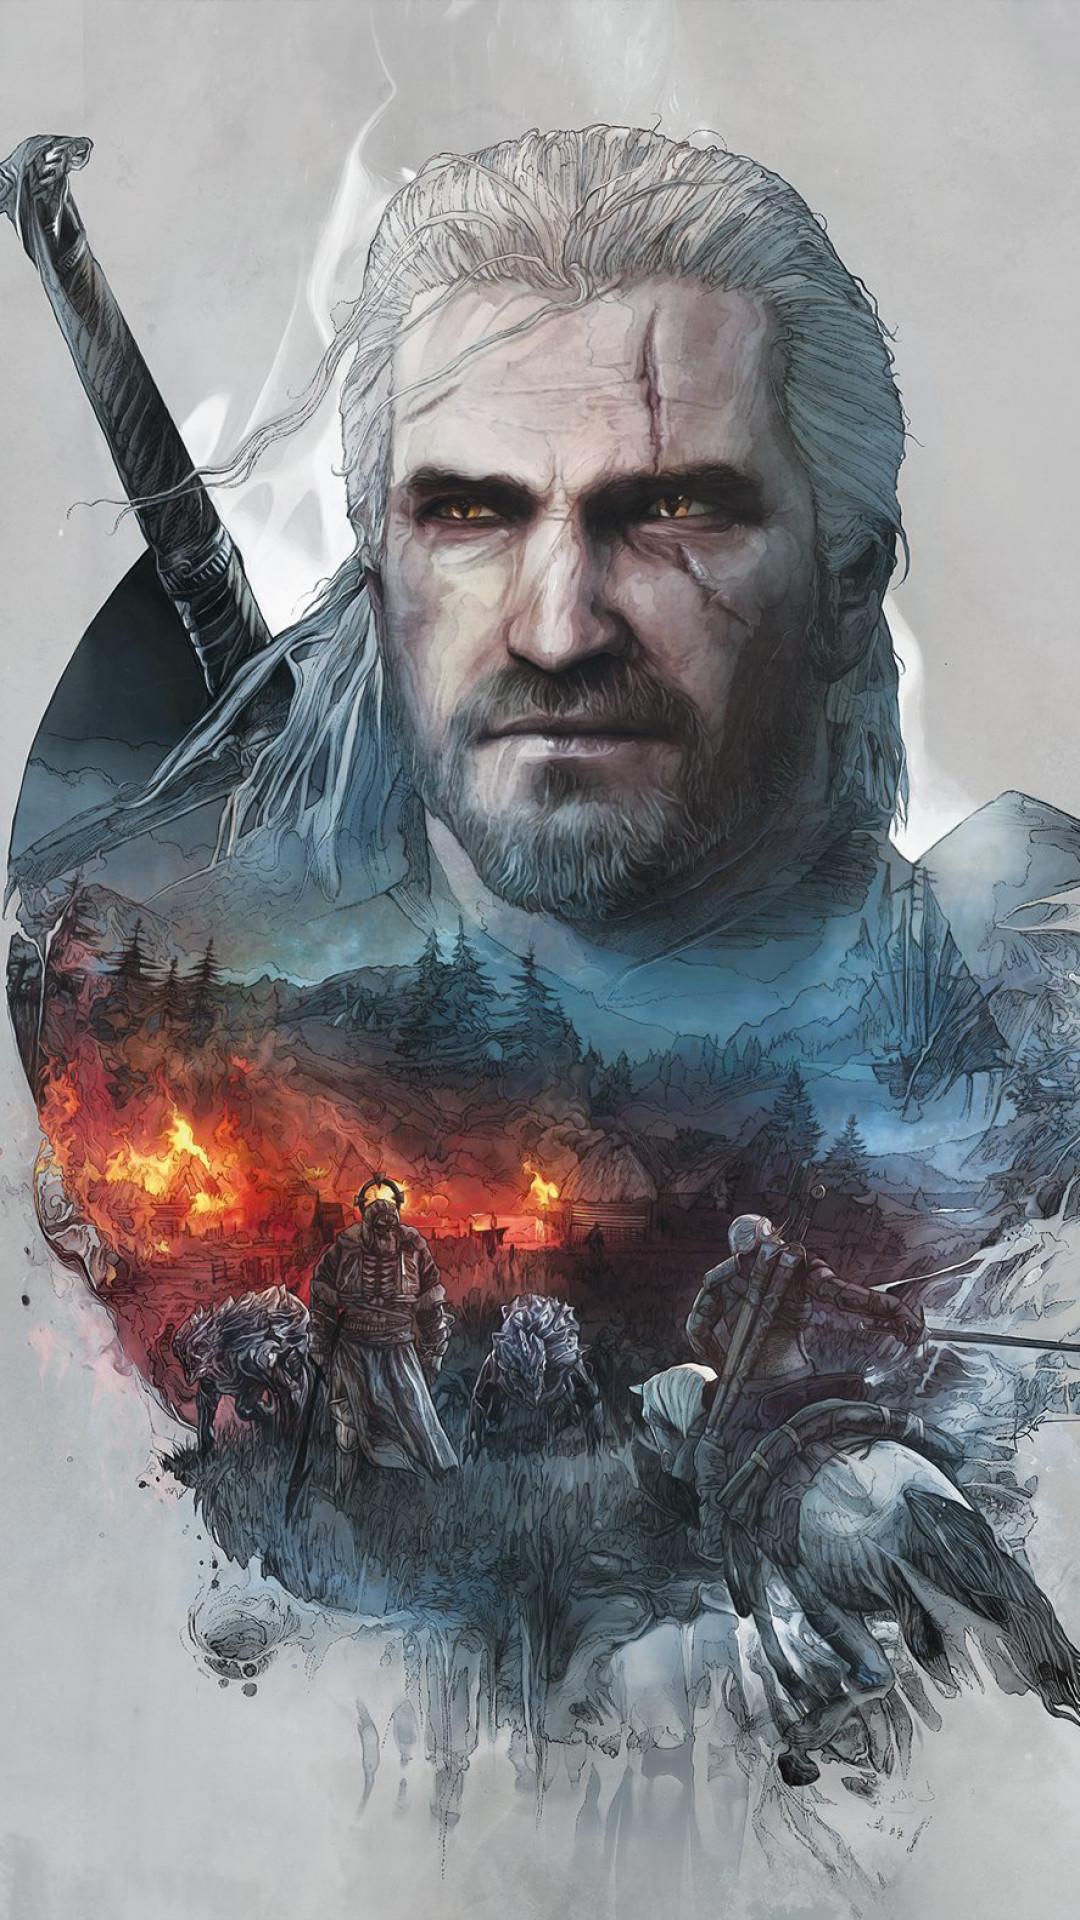 Witcher 3 iPhone Wallpaper